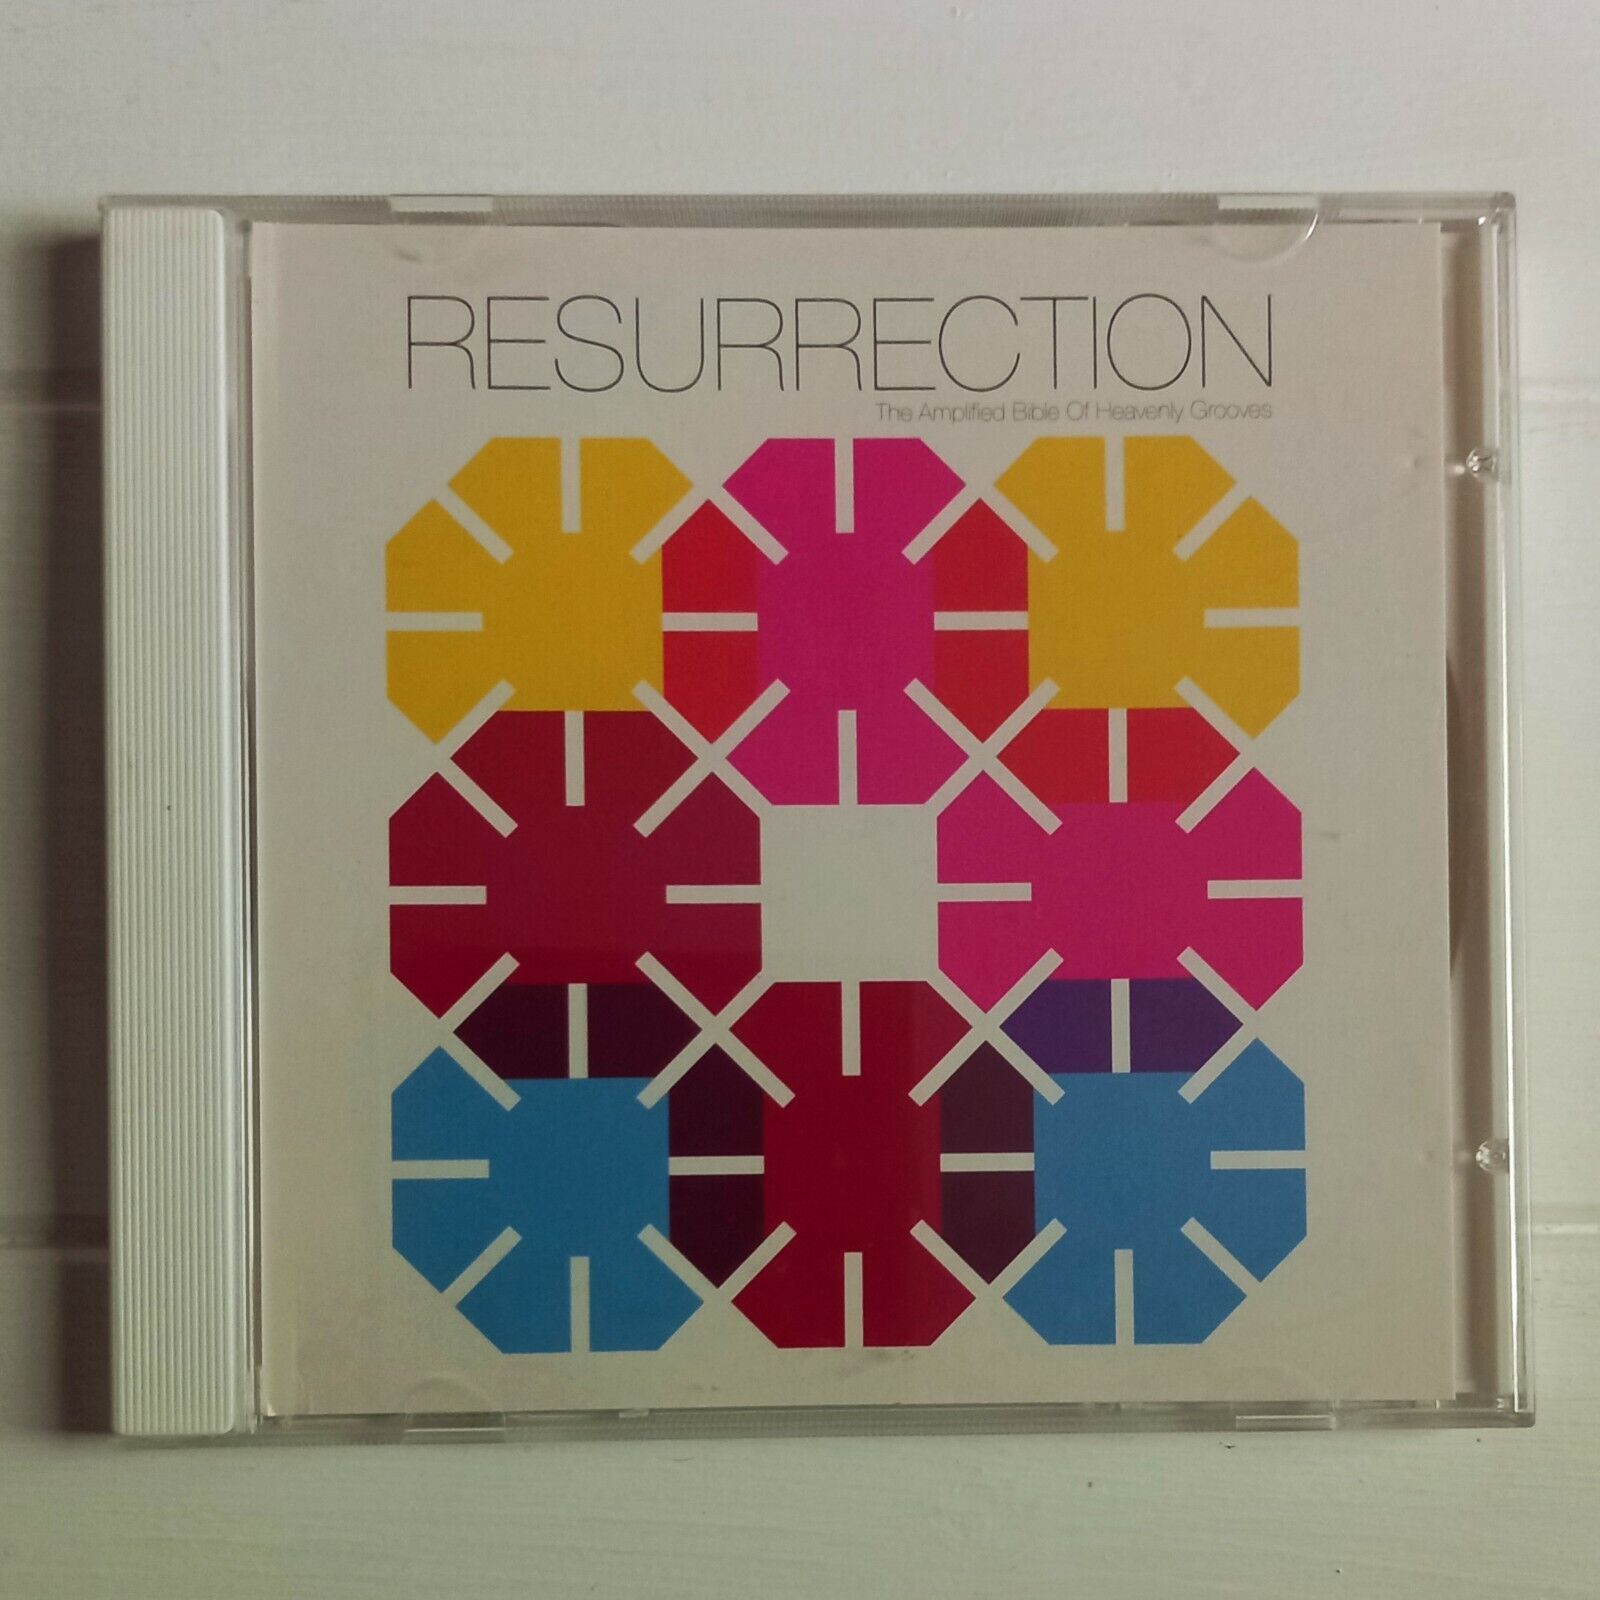 Resurrection: The Amplified Bible of Heavenly Grooves by Various Artists CD